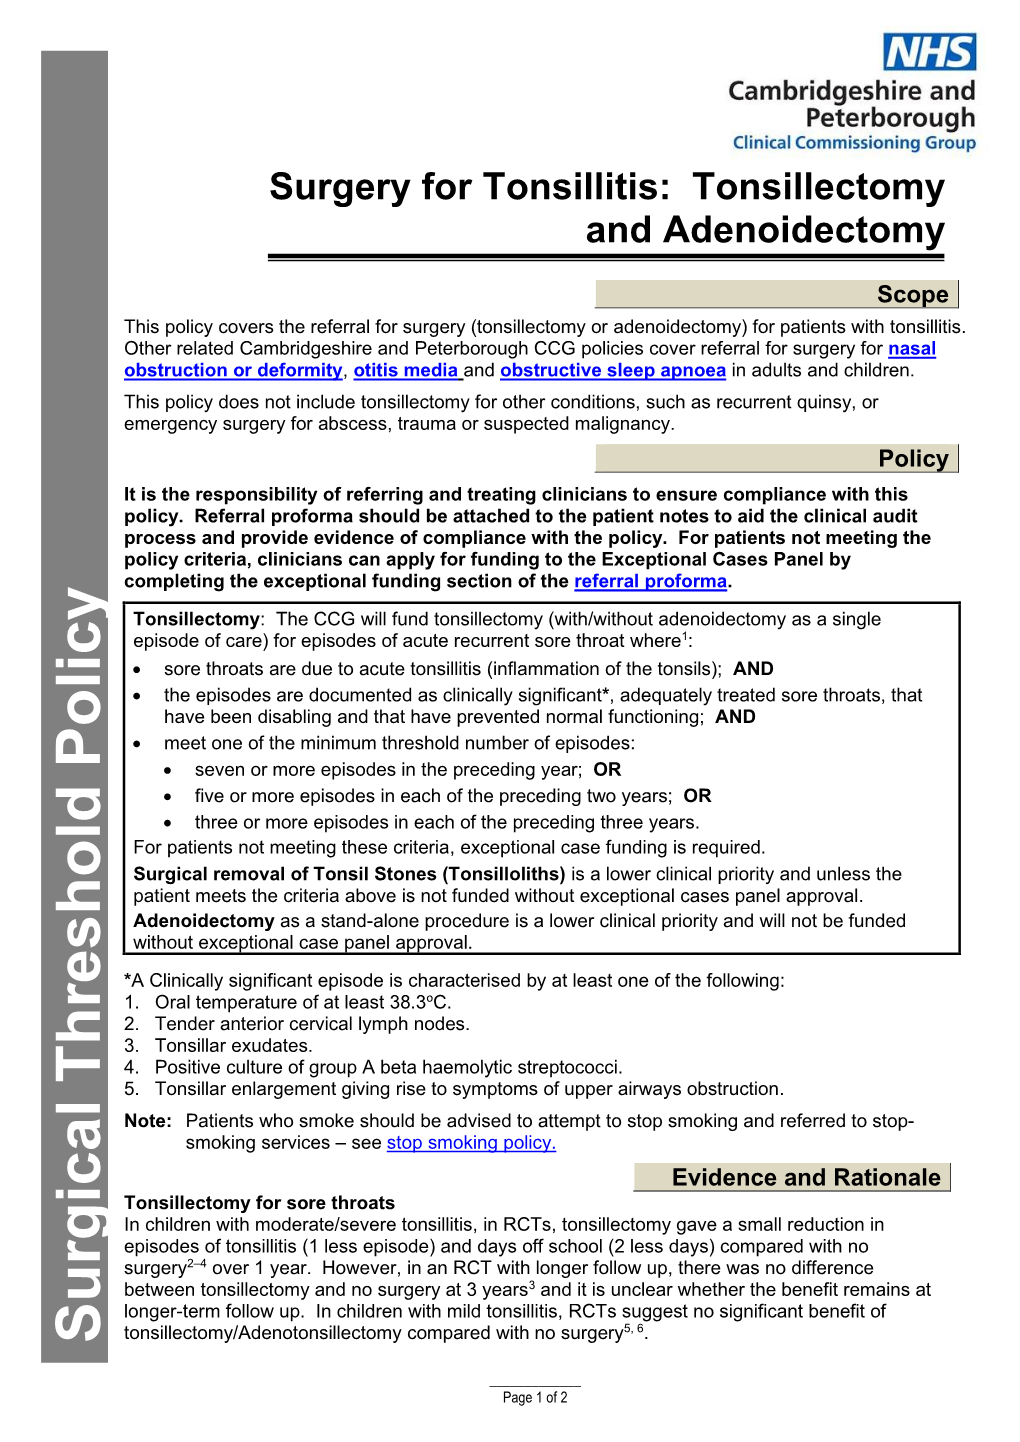 Tonsillectomy and Adenoidectomy